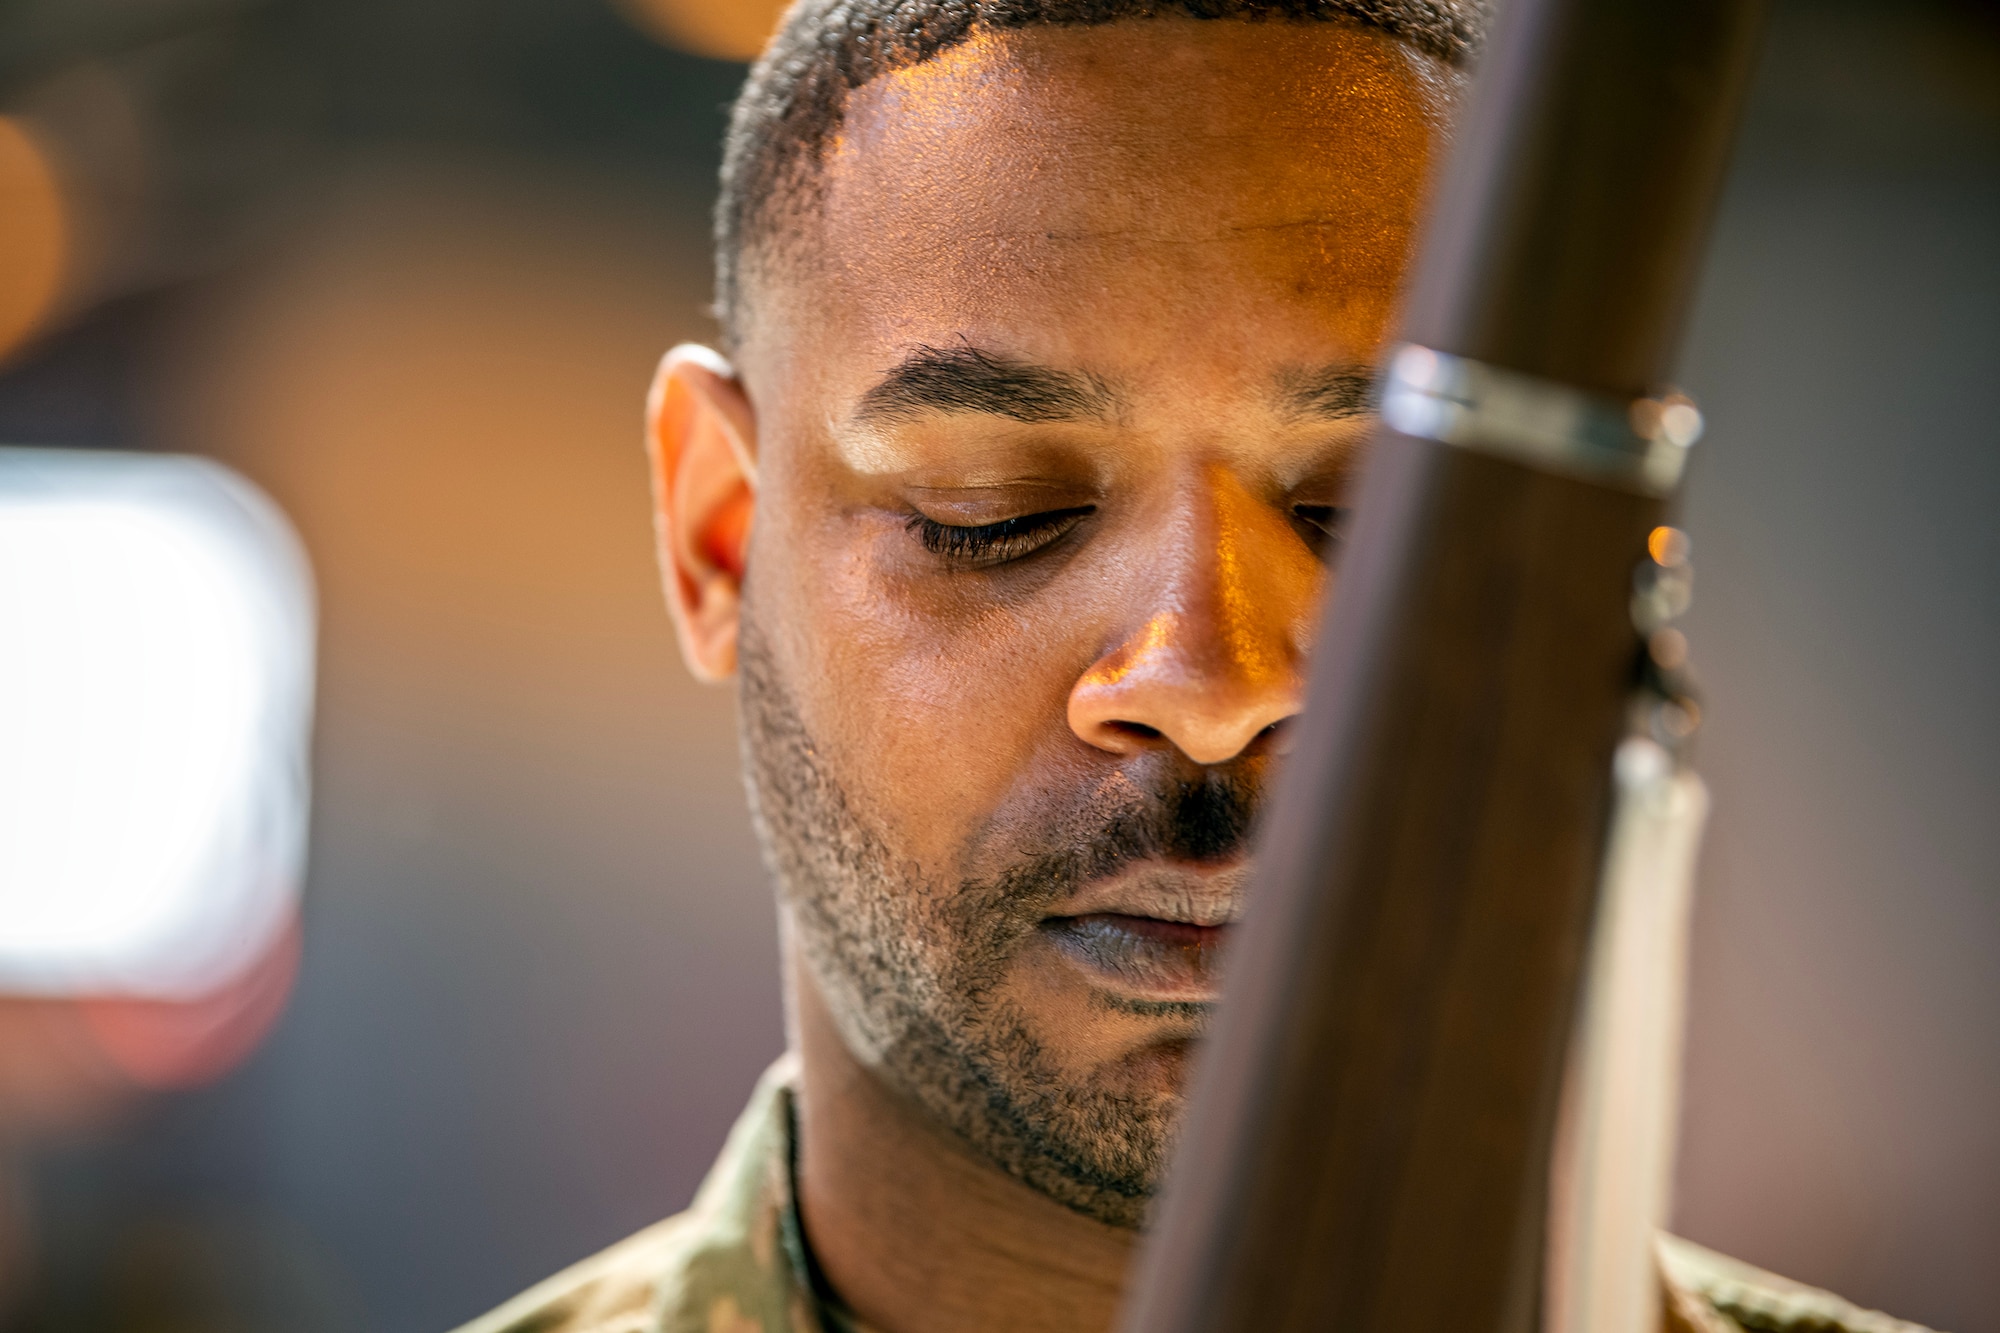 U.S. Air Force Tech Sgt. Jaz Cox-Gibbs, 423d Air Base Group Honor Guard team member, practices drill maneuvers at RAF Alconbury, England, April 21, 2023. In order to become HG members, Airmen must complete rigorous initial training to ensure they are qualified to render military honors. (U.S. Air Force photo by Staff Sgt. Eugene Oliver)